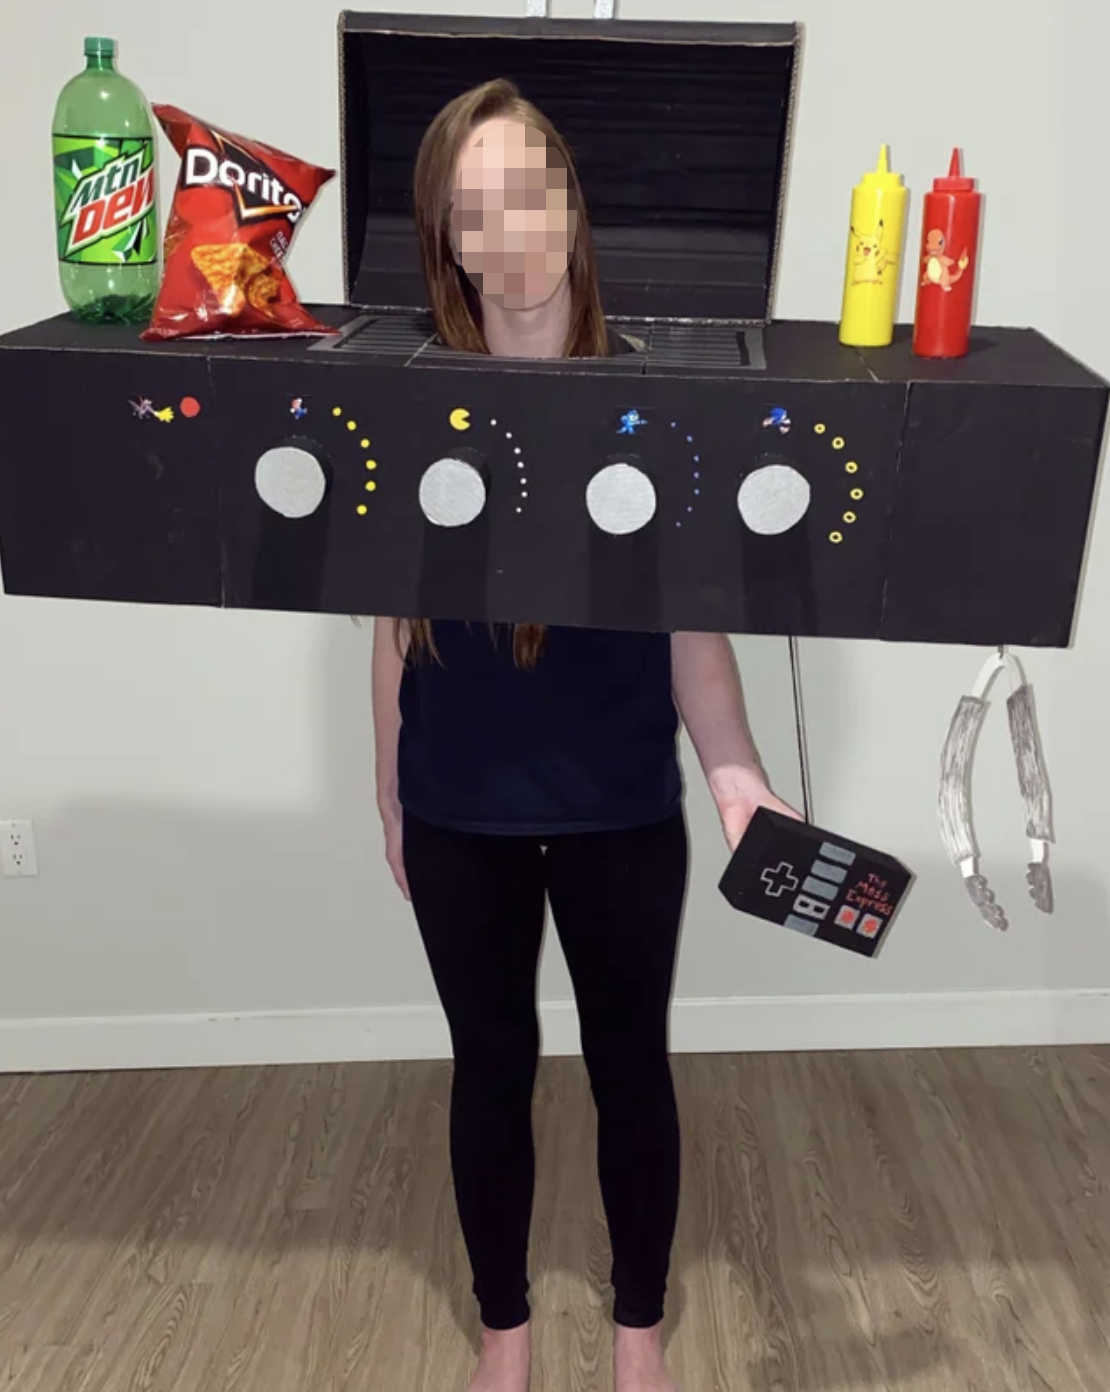 A girl in the middle of a grill costume with snacks and condiments on top, holding a gaming console